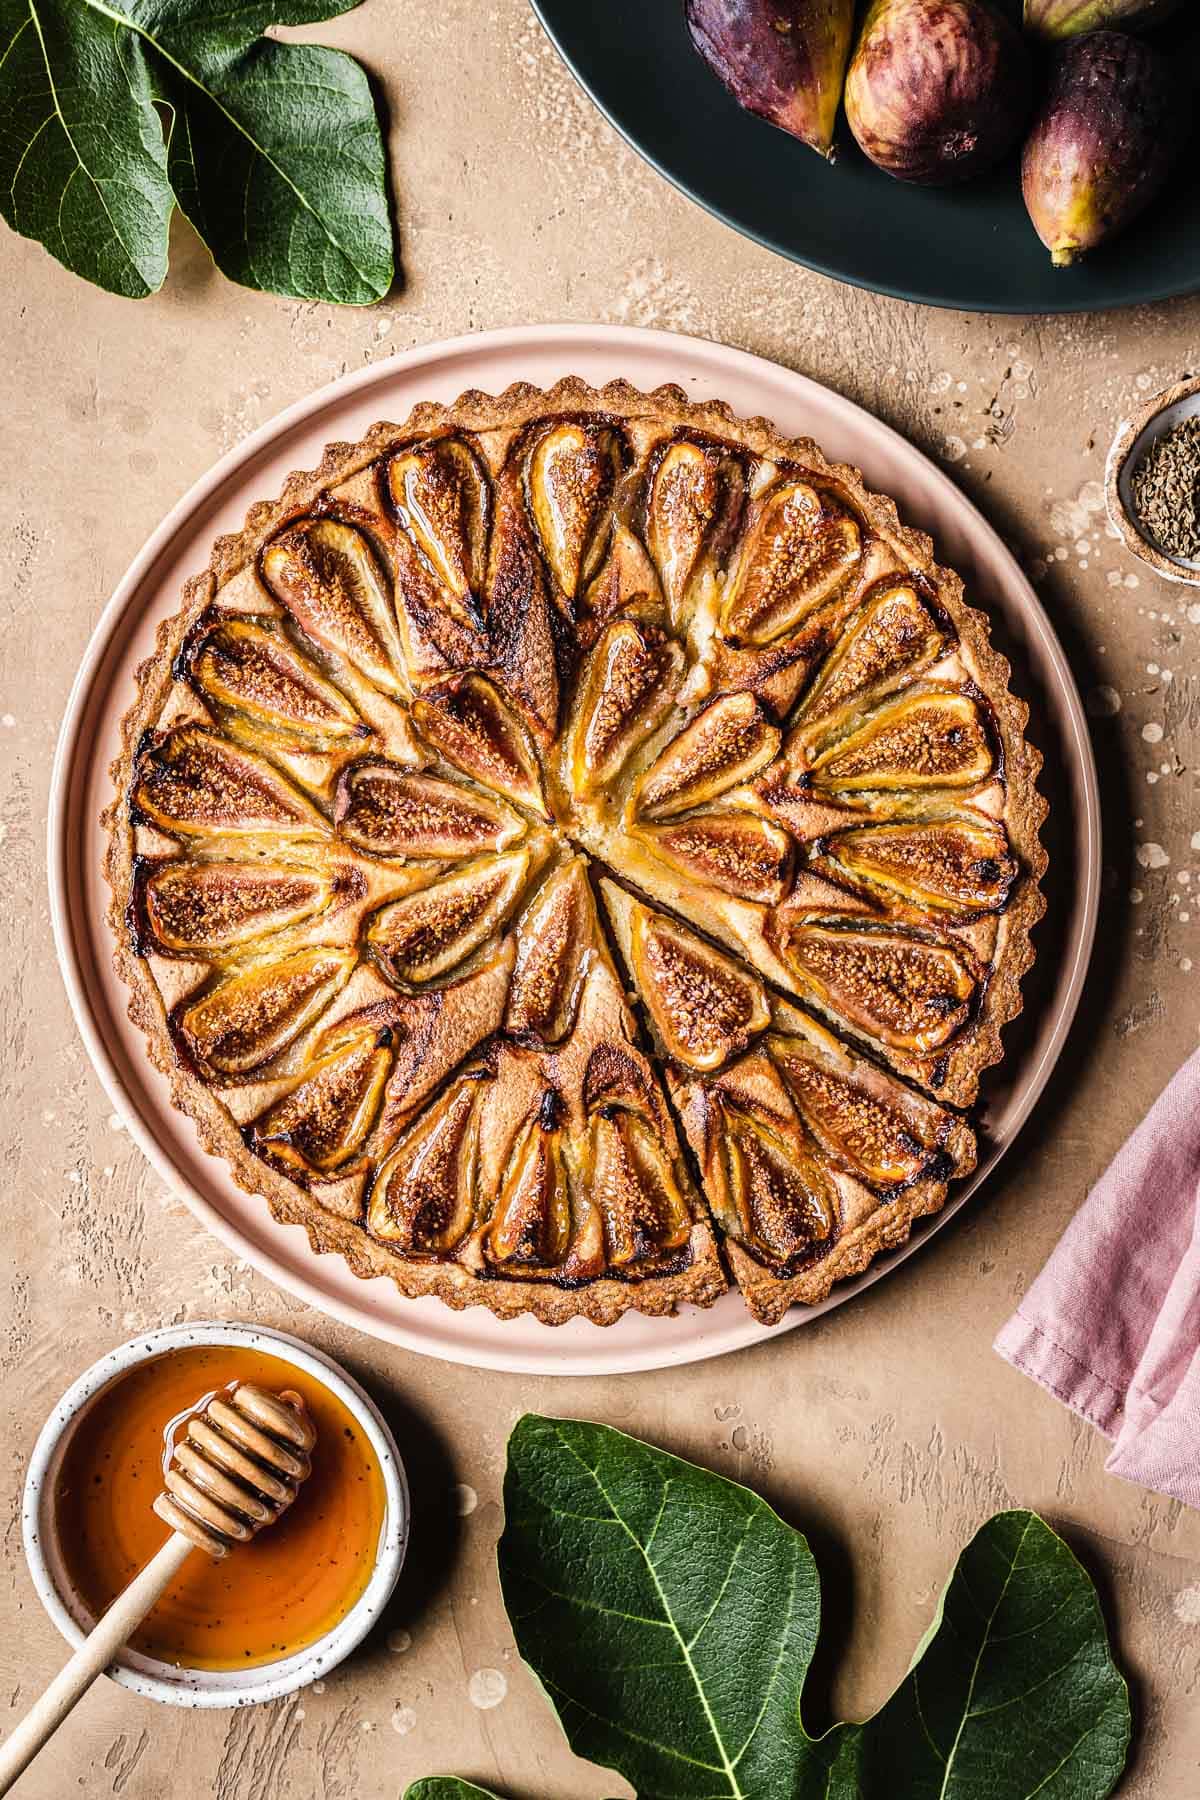 A baked tarte aux figues with a slice cut out, with fig leaves and honey nearby.